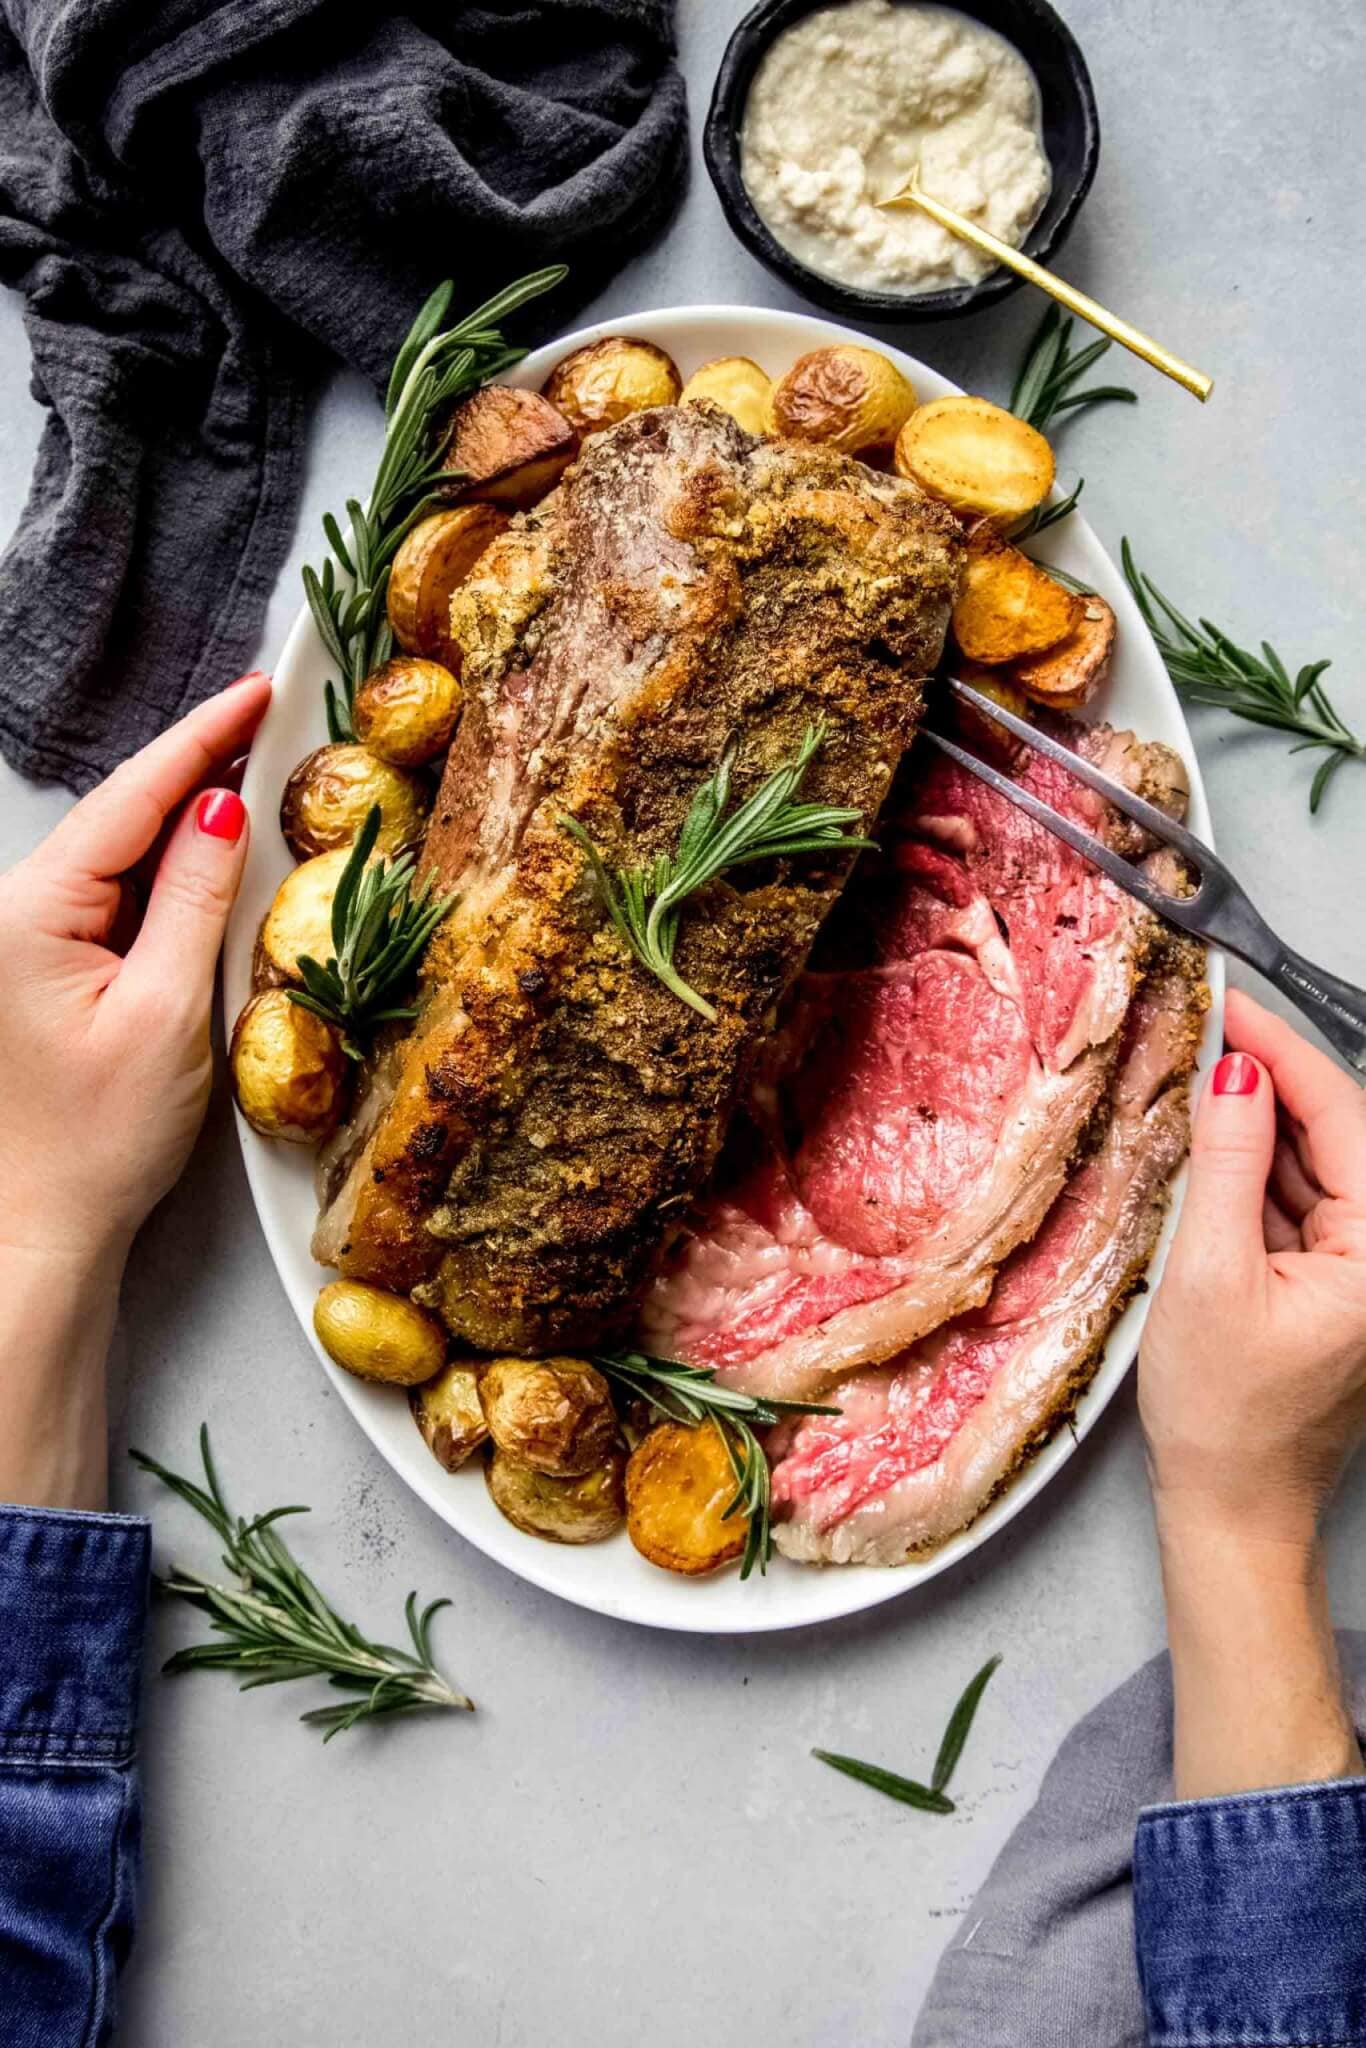 Two hands holding platter or prime rib arranged with roasted potatoes.